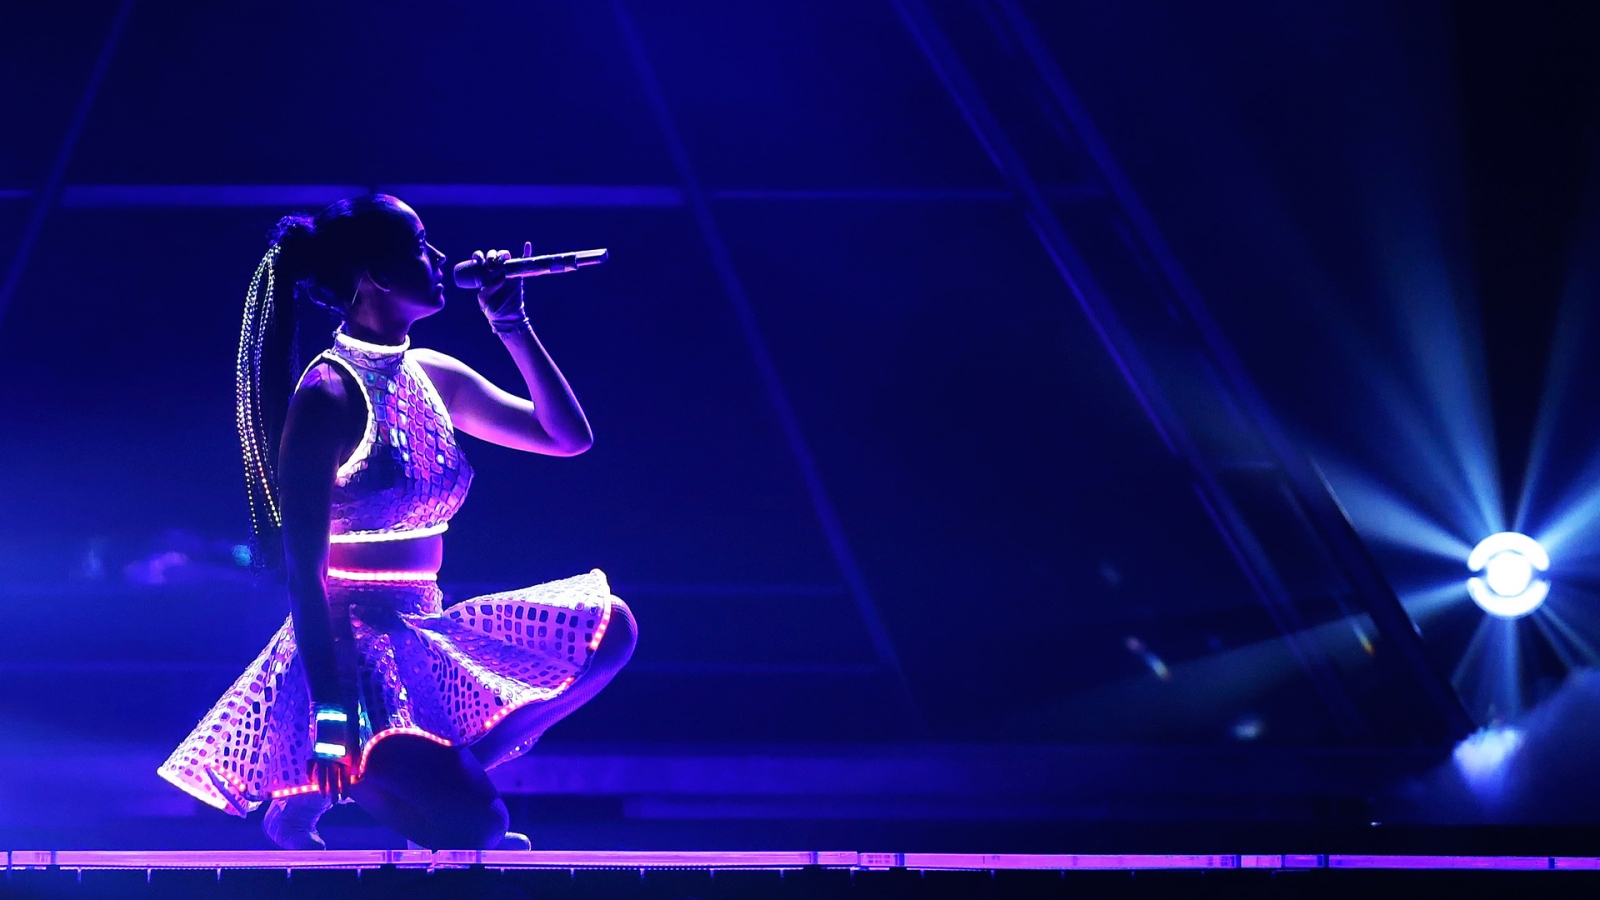 Katy Perry Live Concert for 1600 x 900 HDTV resolution